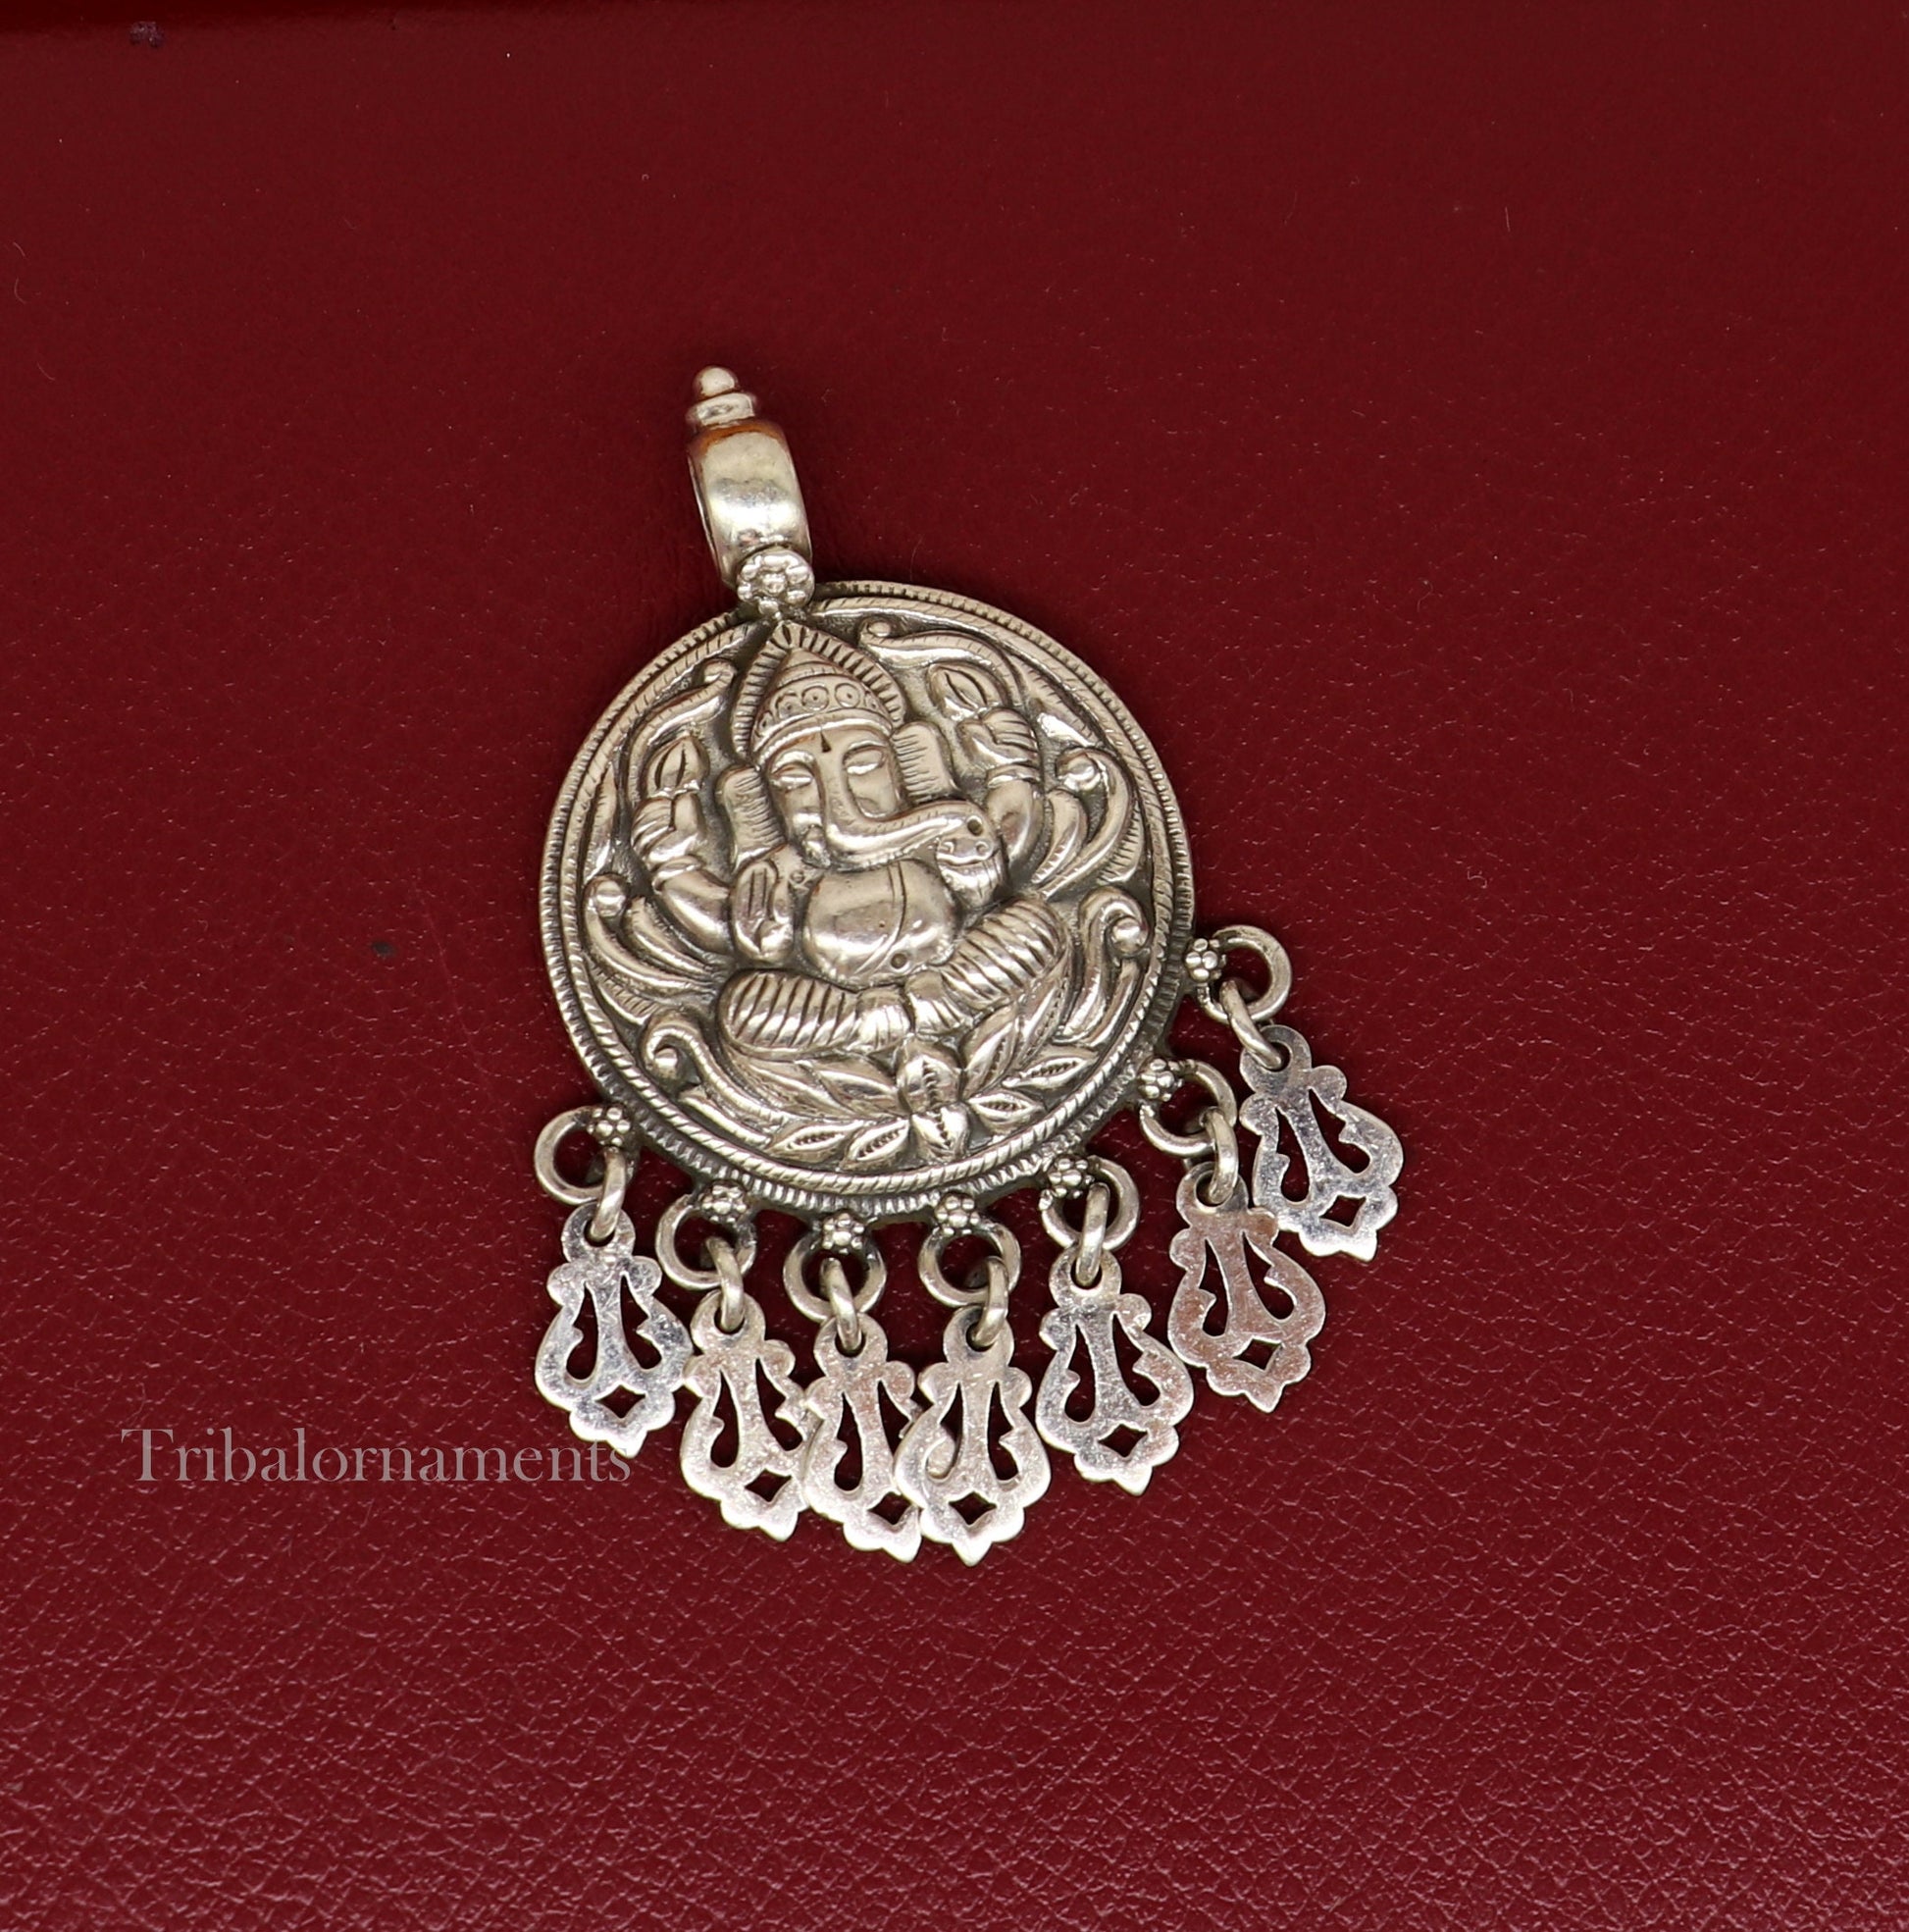 Lord Ganesha vintage style pendant handmade 925 sterling silver pendant with stunning hangings tribal jewelry pendant necklace india ssp835 - TRIBAL ORNAMENTS